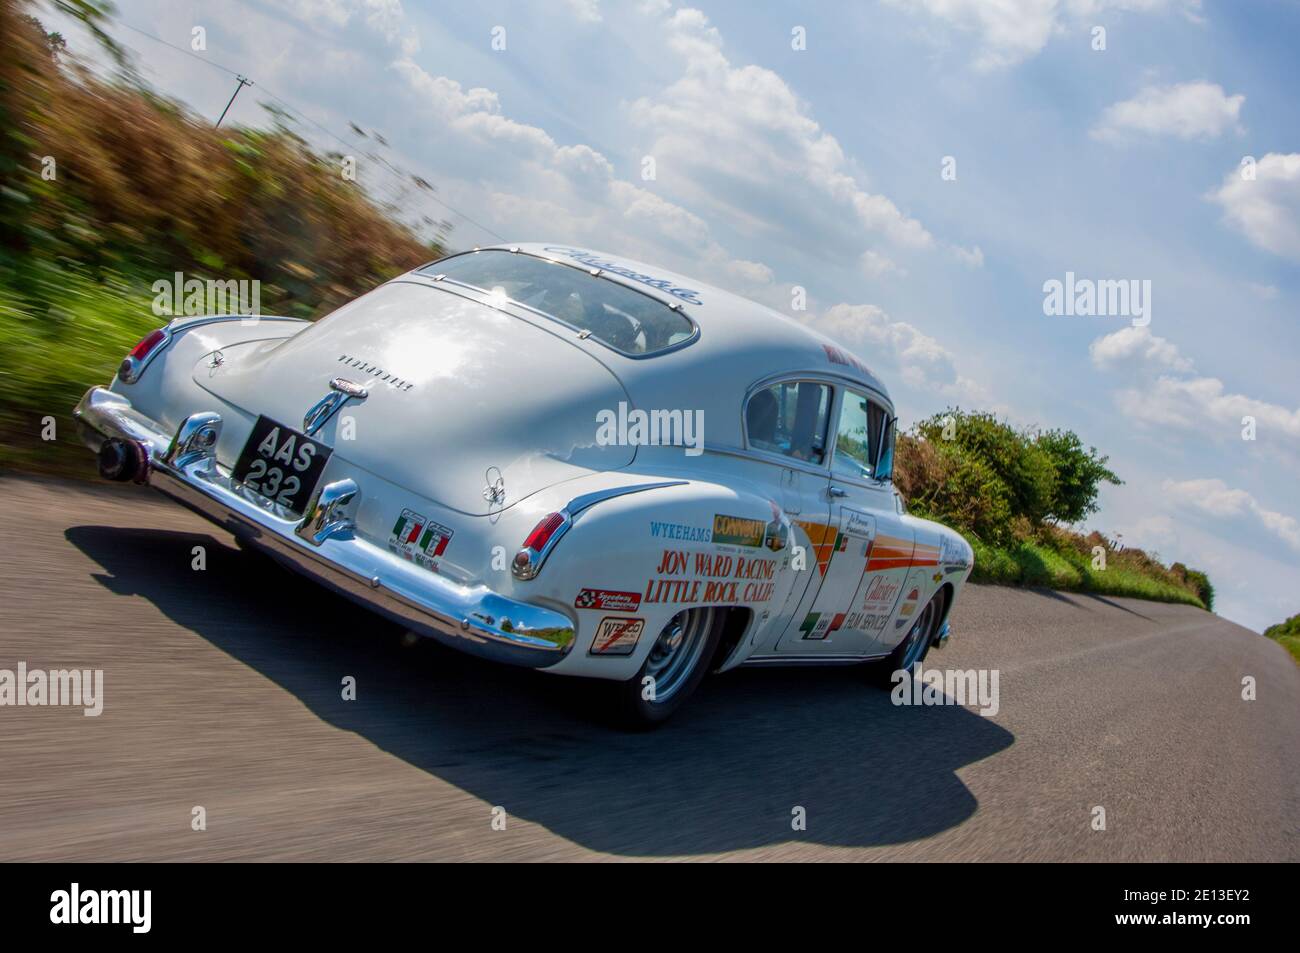 1950 Oldsmobile Rocket 88 prepared for the Pan American rally Stock Photo